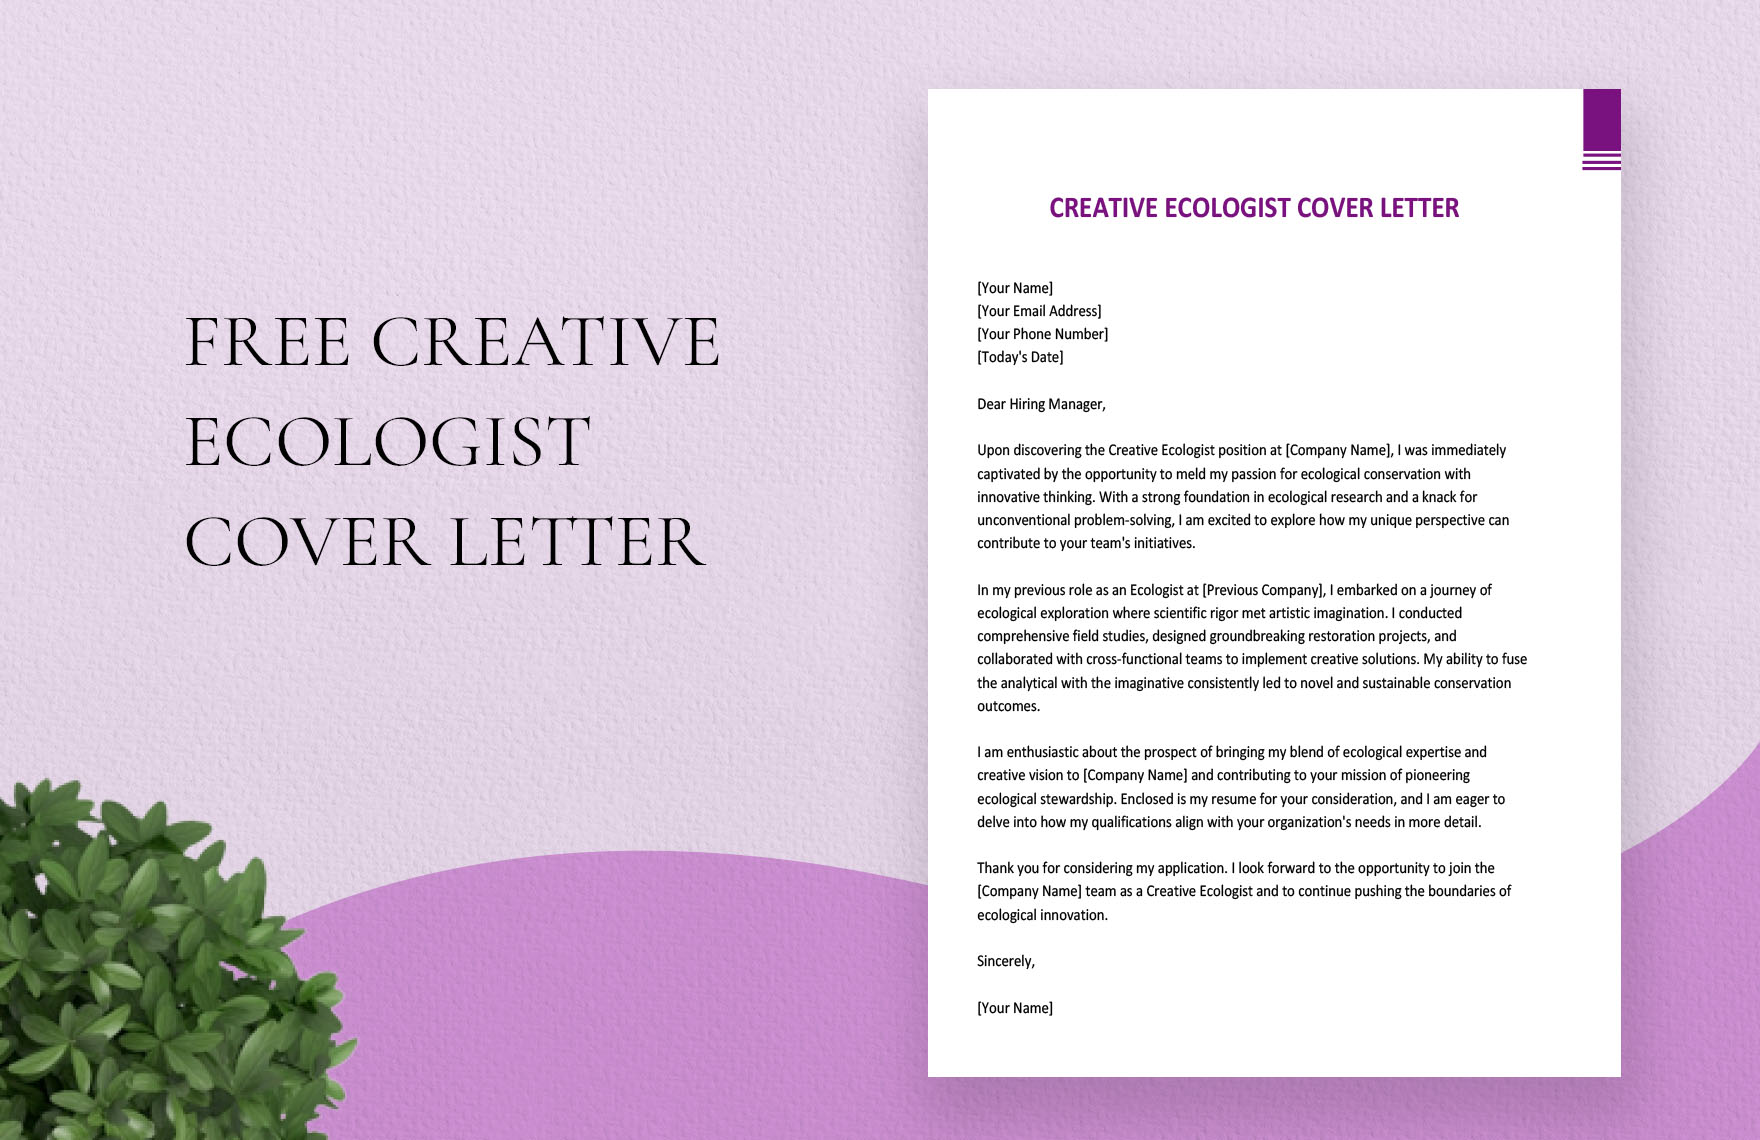 Creative Ecologist Cover Letter in Word, Google Docs